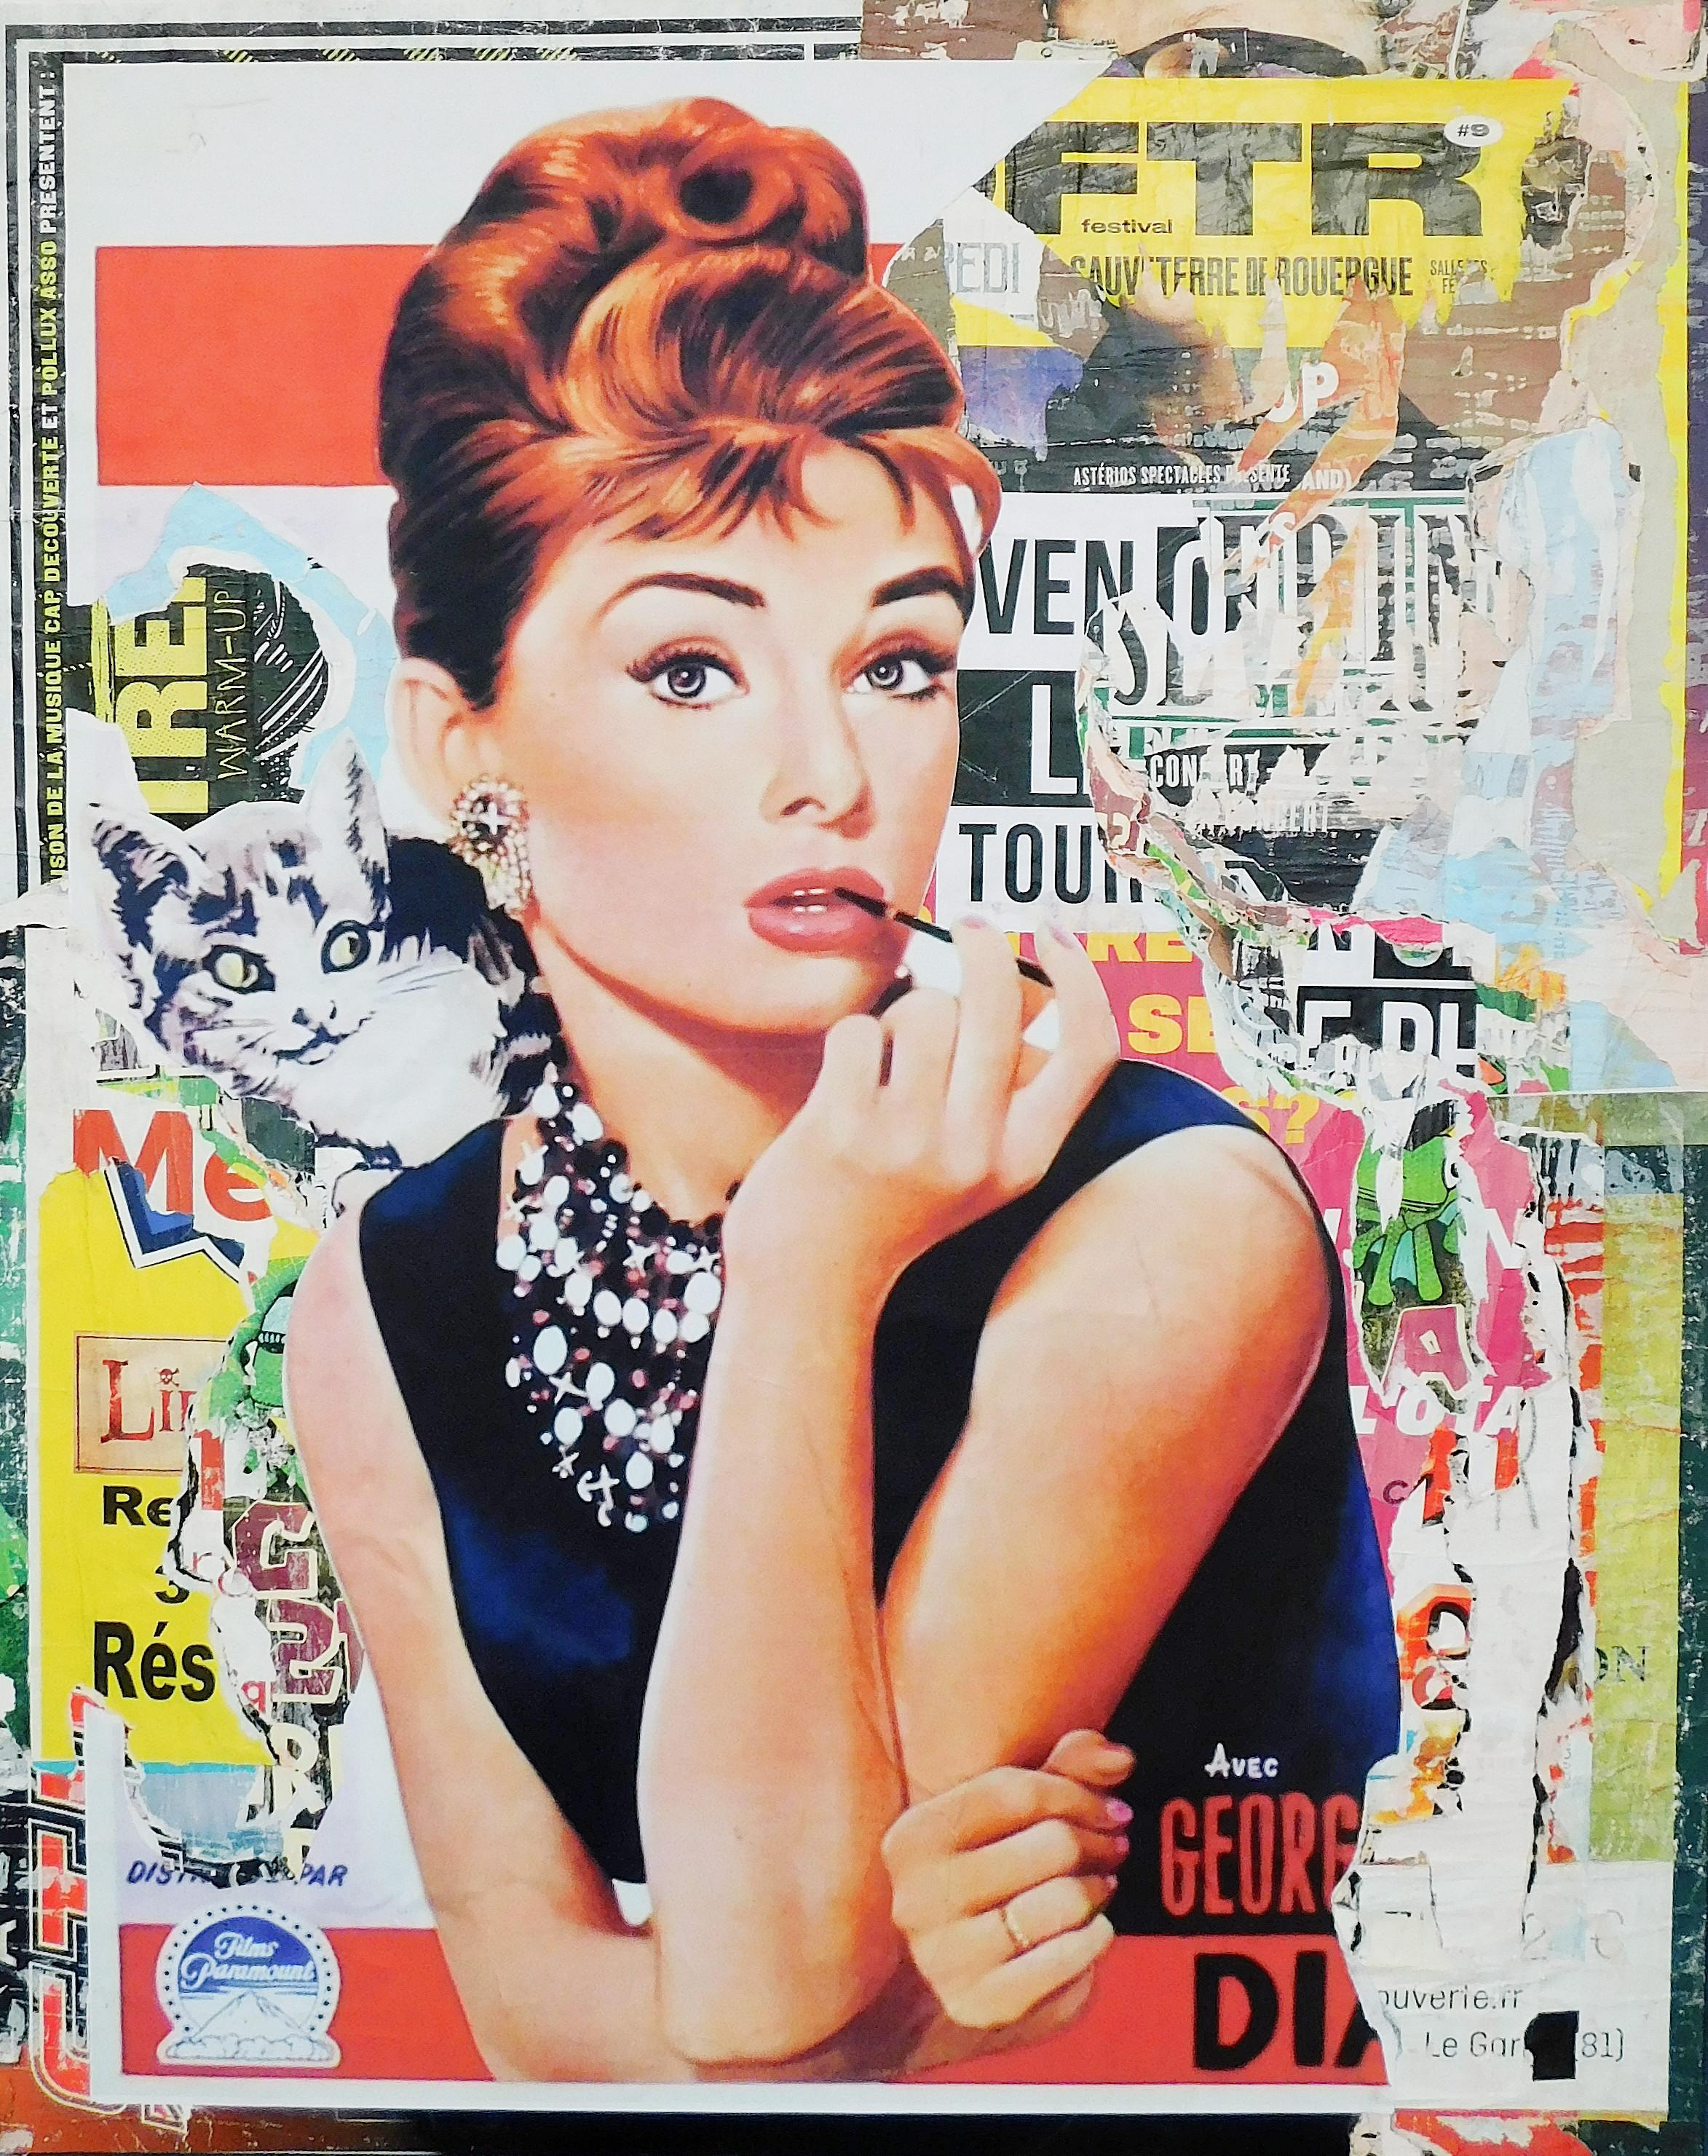 Hepburn - Decollage on canvas - Mixed Media Art by Manucollage